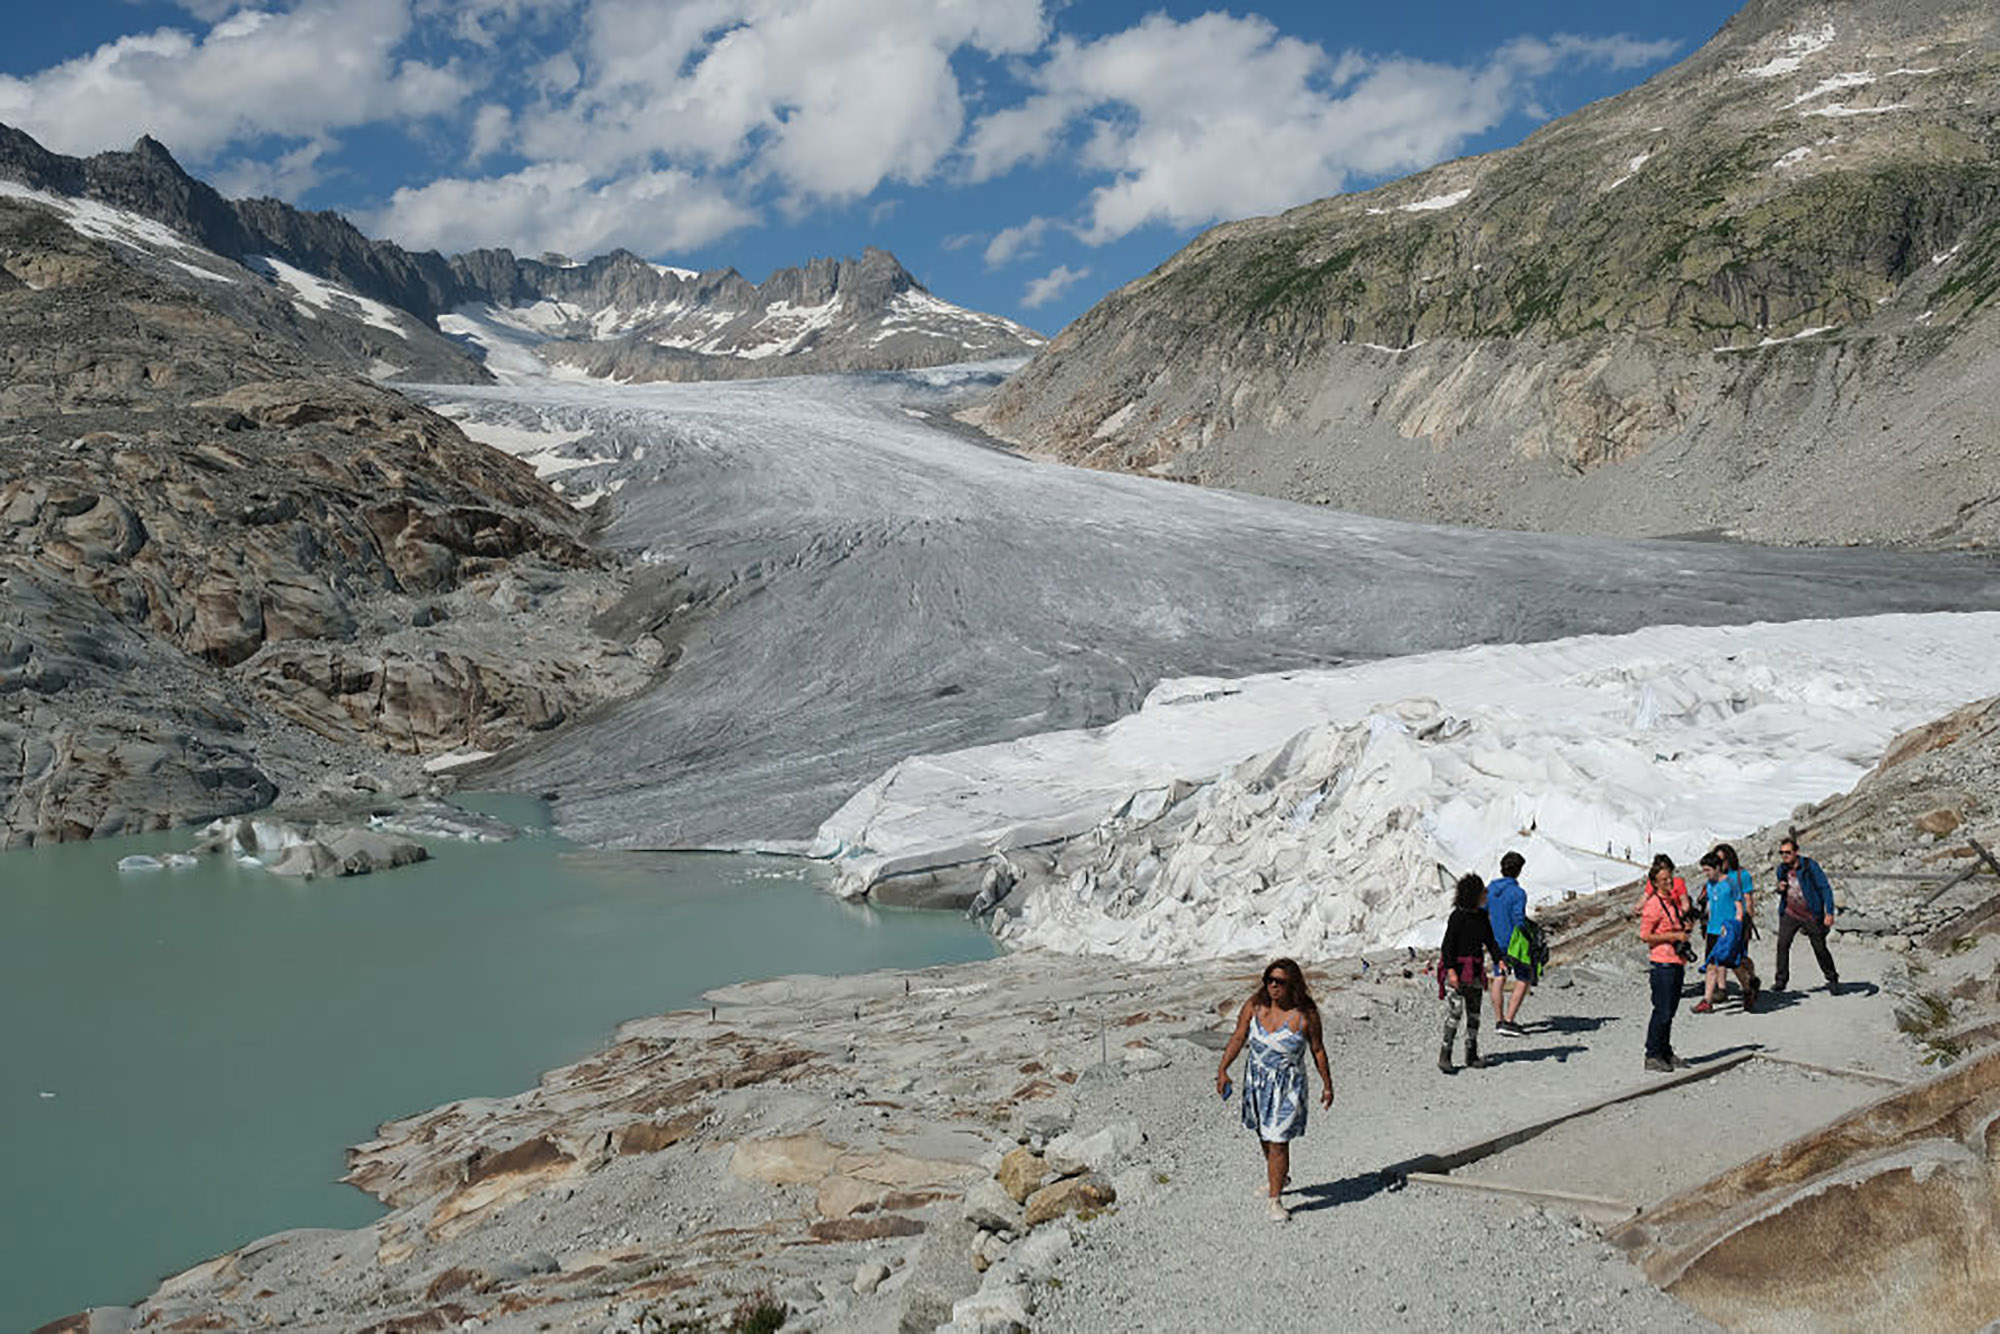 The Rhone glacier above a lake formed by the glacier's meltwater as well as a portion of the glacier covered in UV-resistant material to slow the glacier's melting.